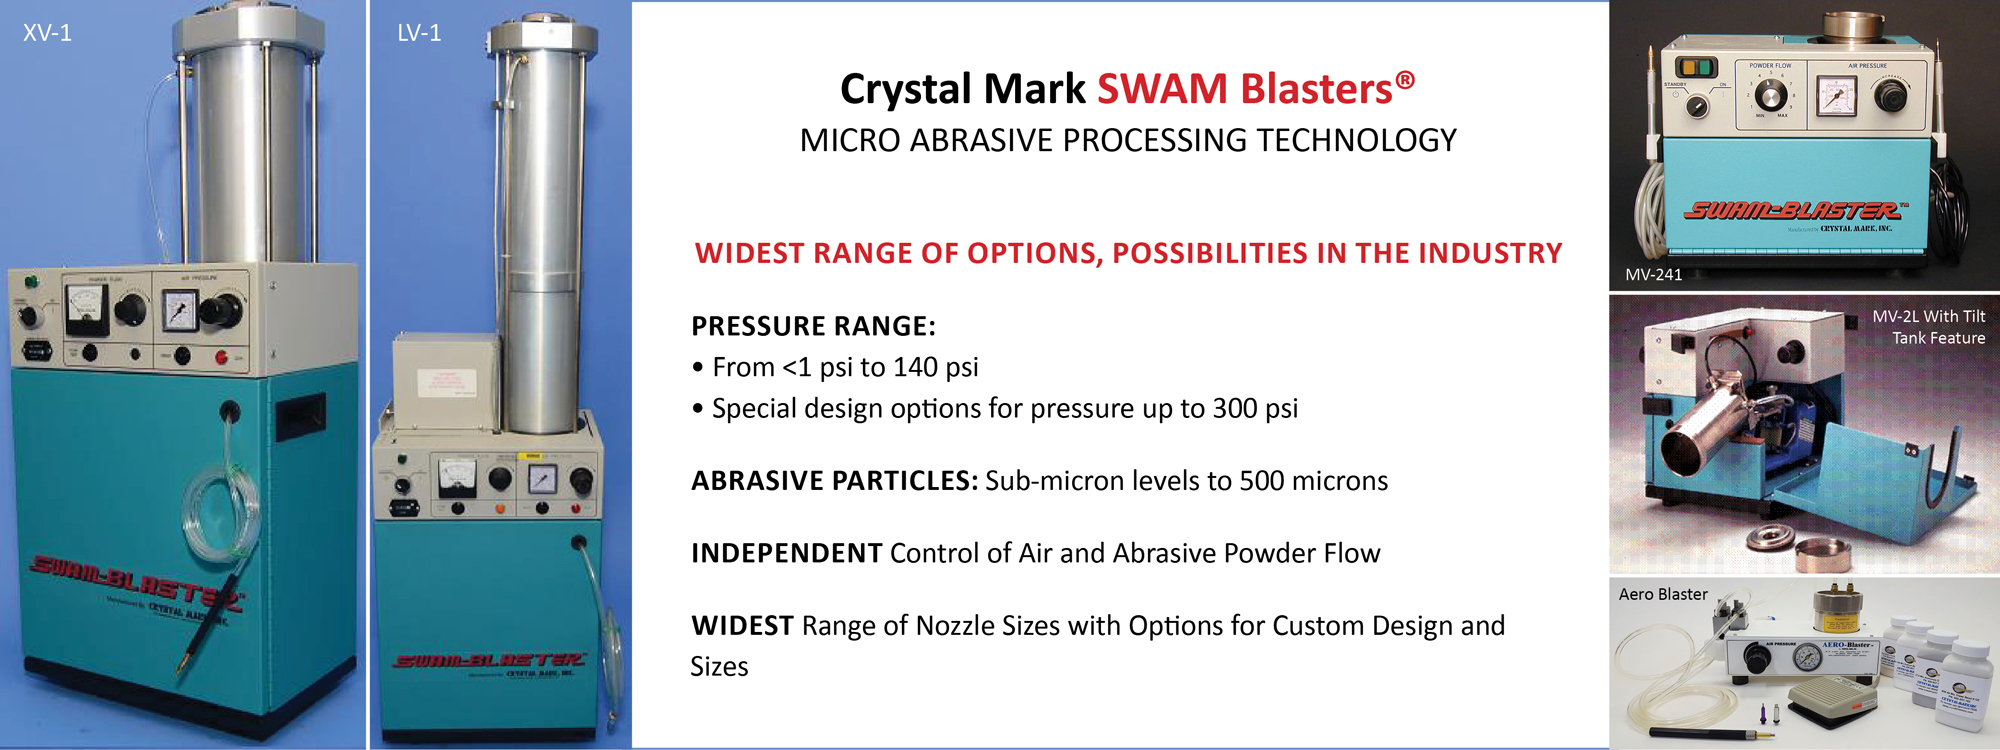 Crystal Mark SWAM Blasters | Micro Abrasive Technology, Product Options, Customer Process Control